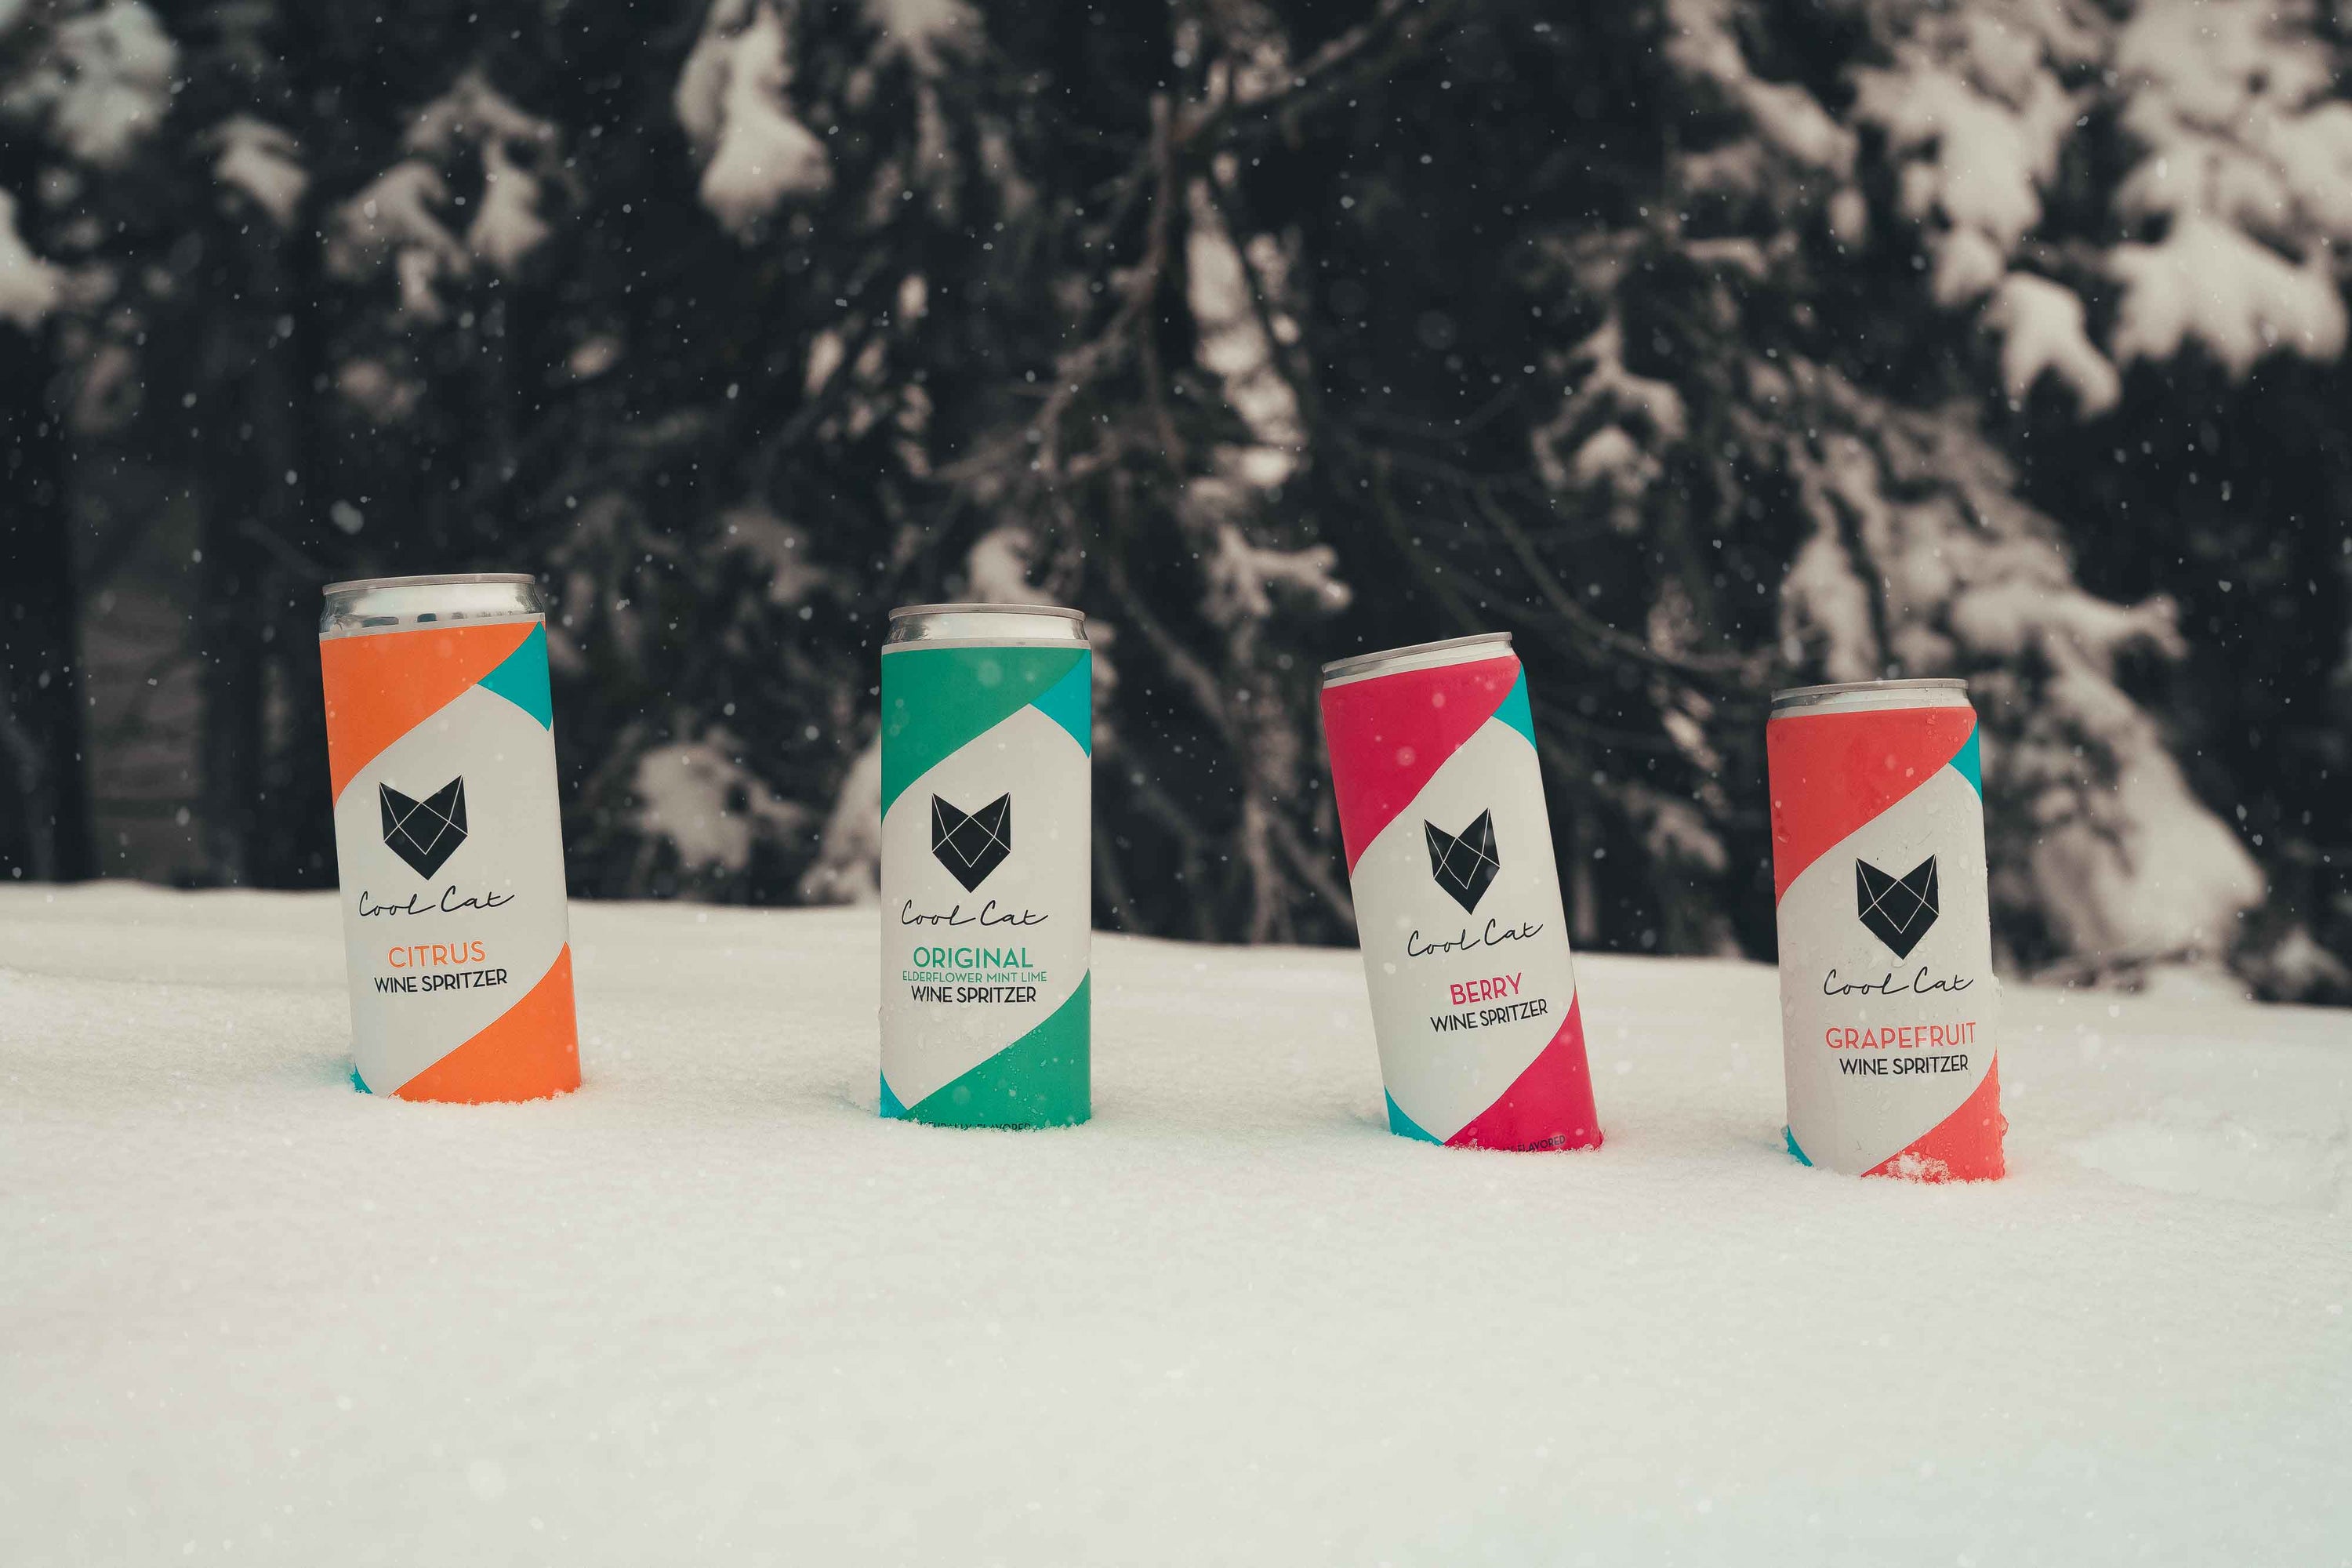 All 4 flavors of Cool Cat Sparkling Cocktail in the snow.